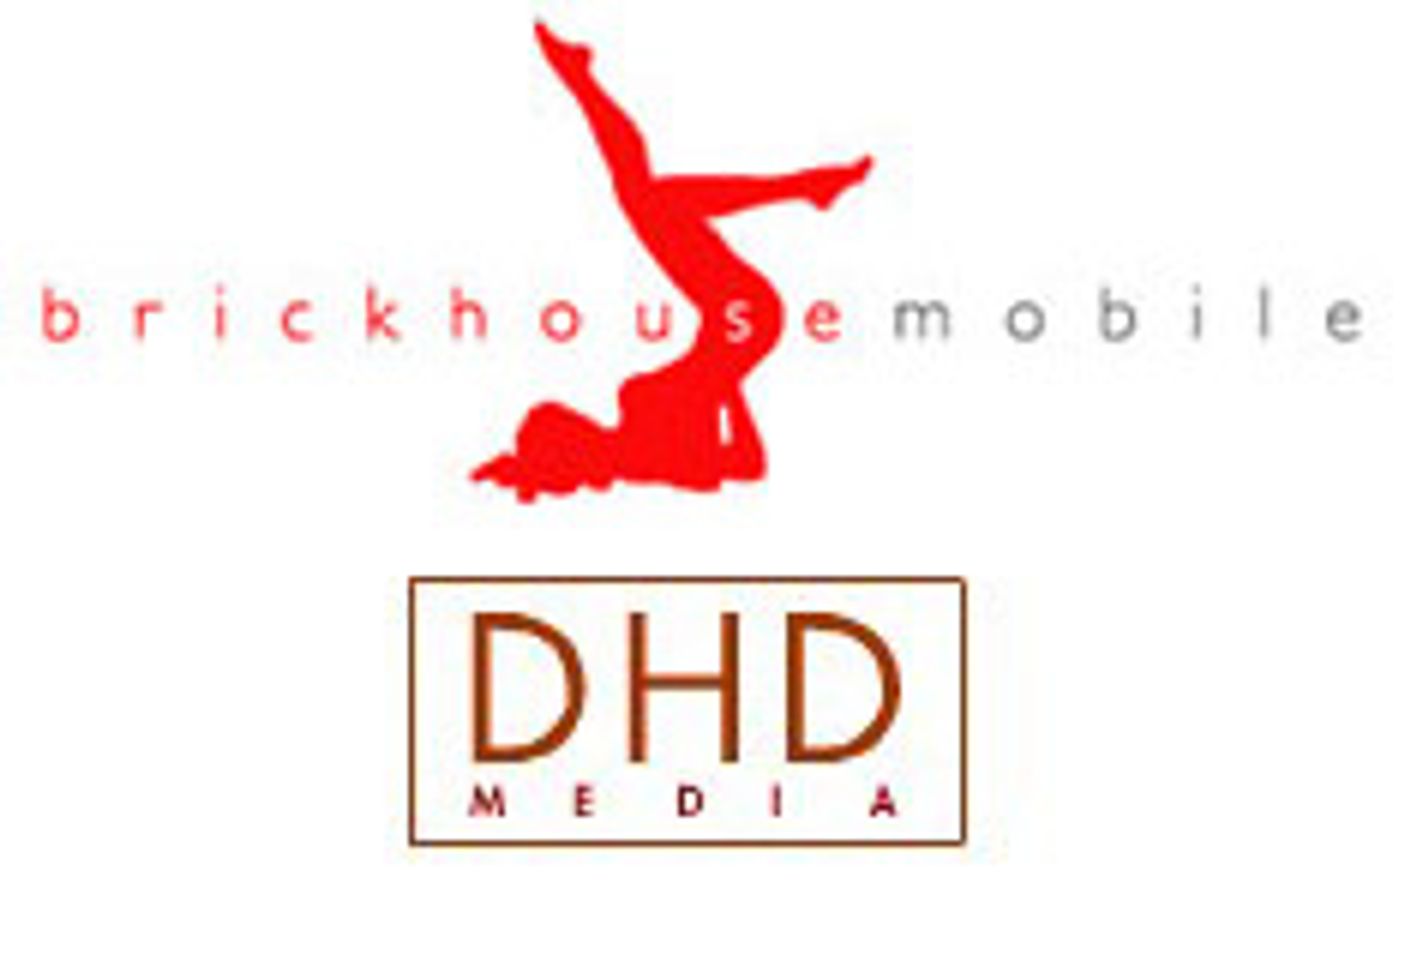 DHD Media Enters Wireless Billing With Brickhouse Mobile